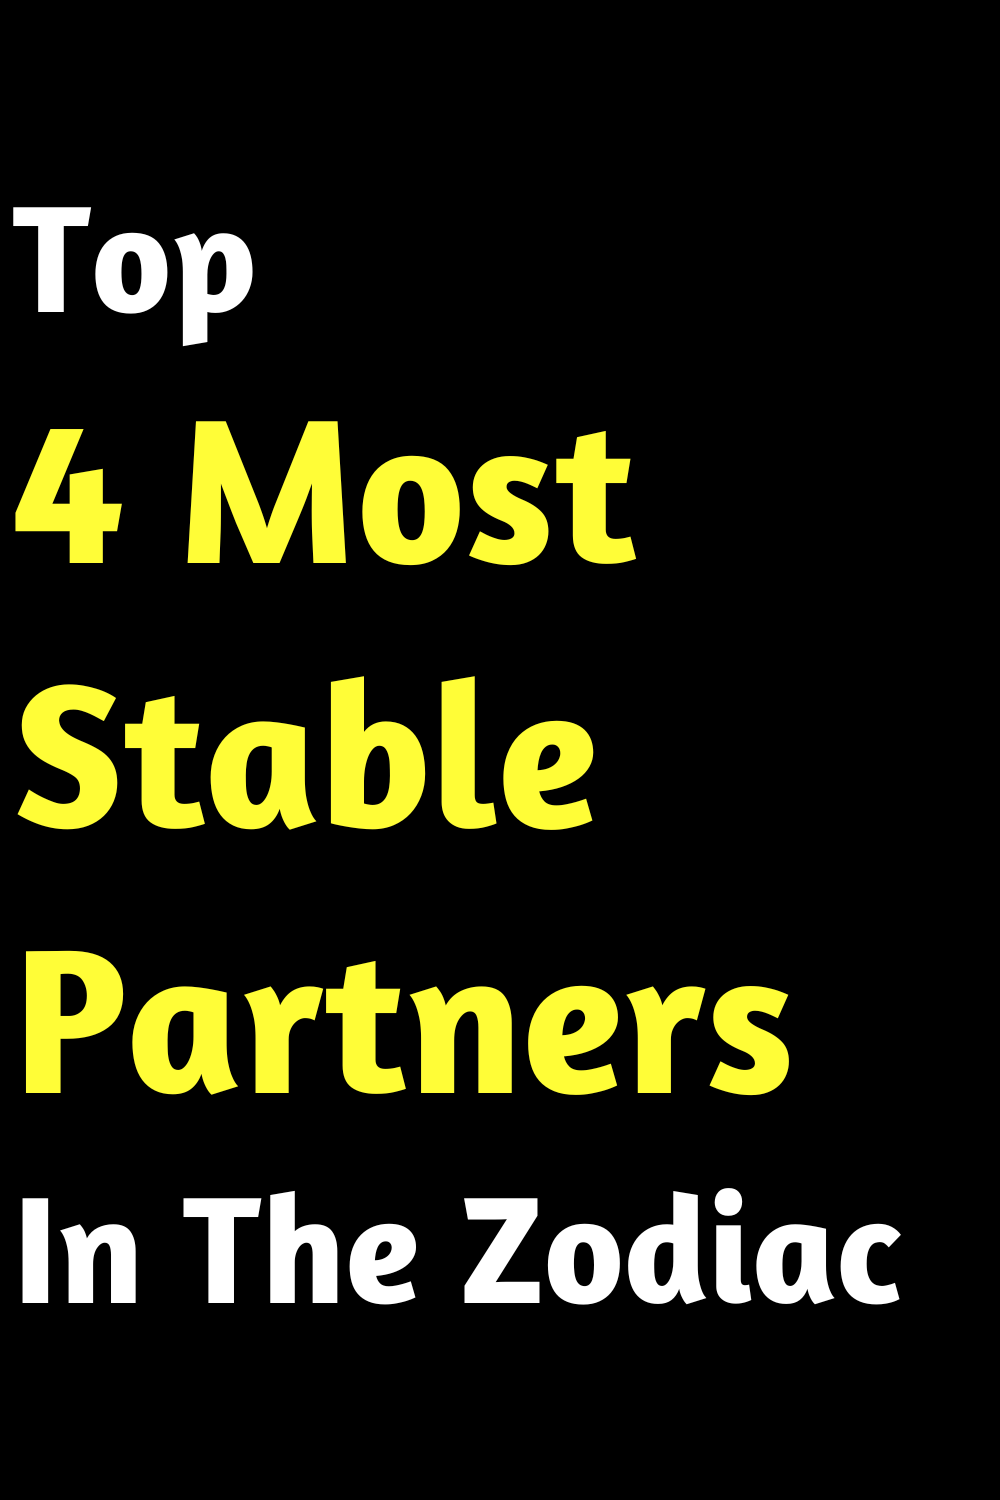 Top 4 Most Stable Partners In The Zodiac